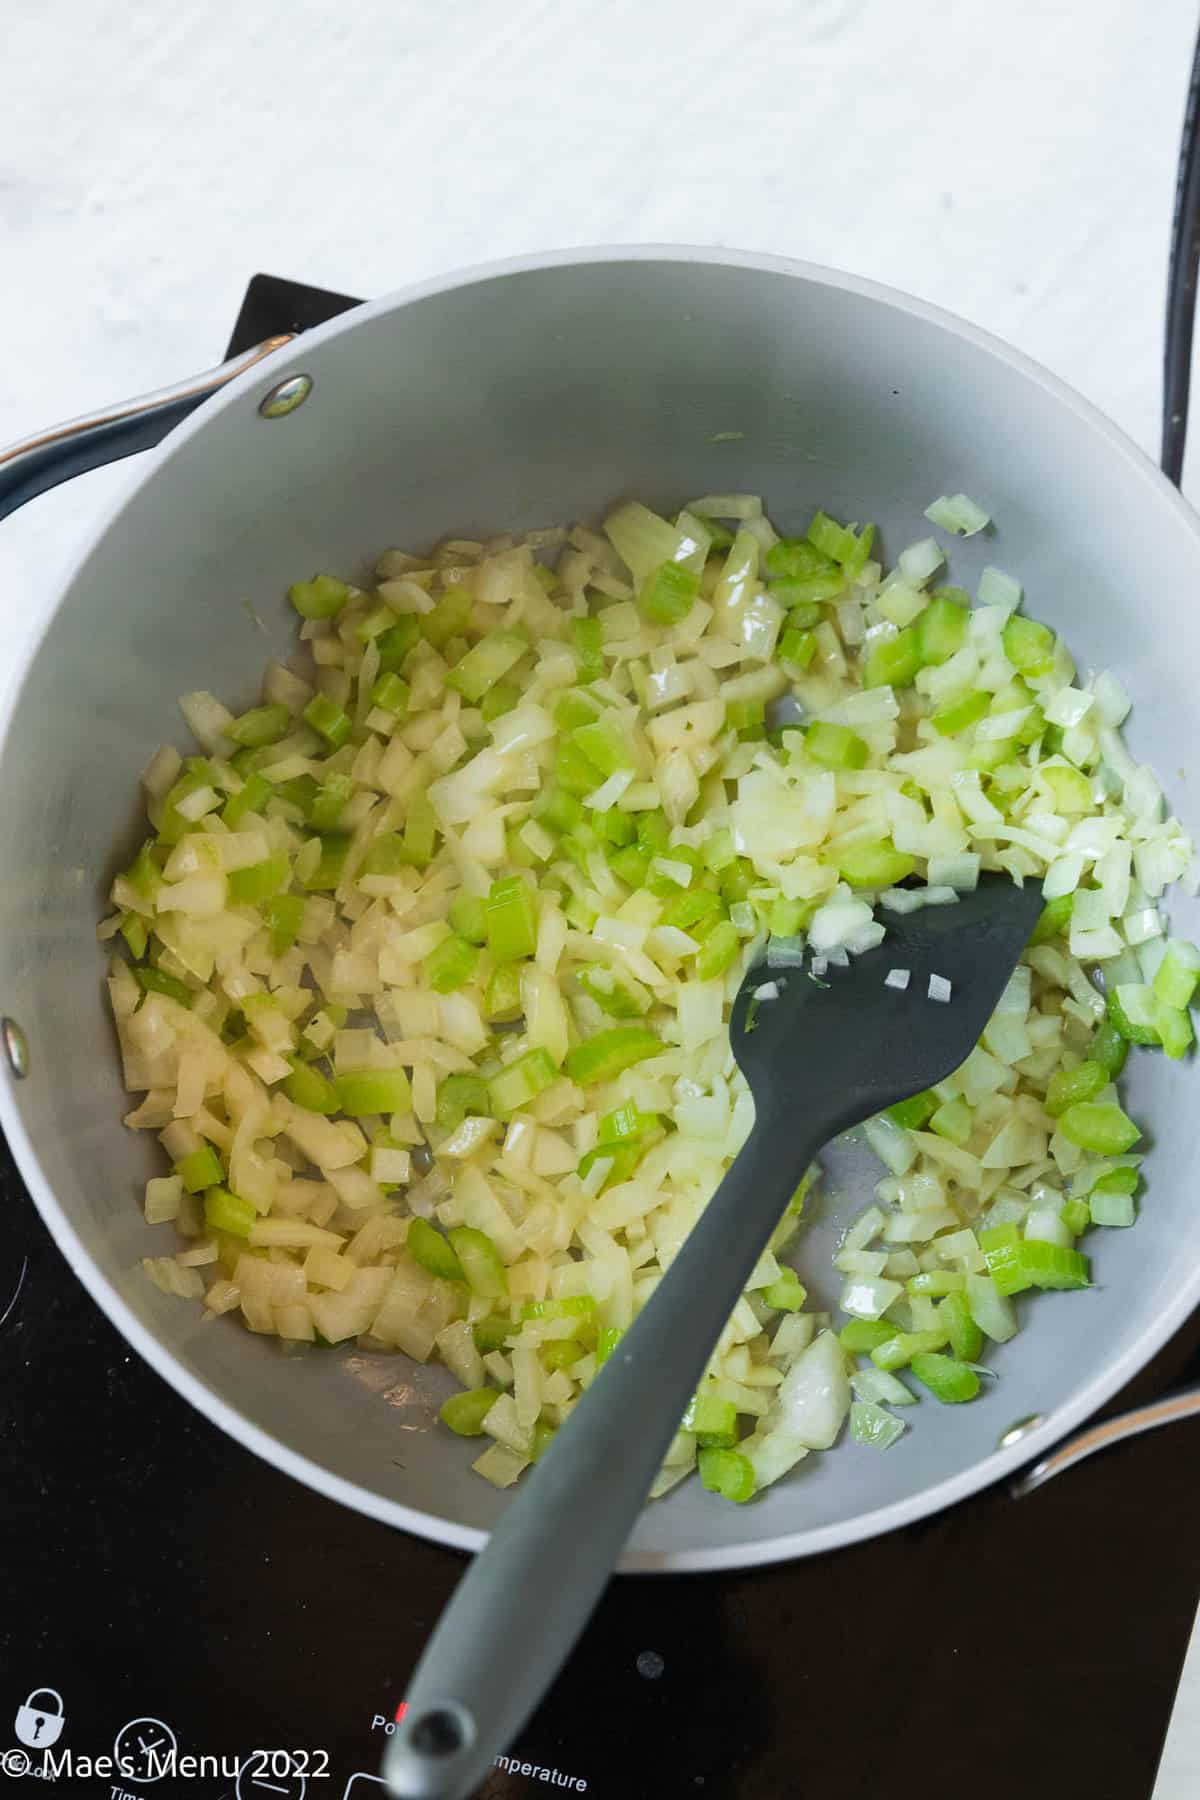 Sauteing onions and celery in a large pot.